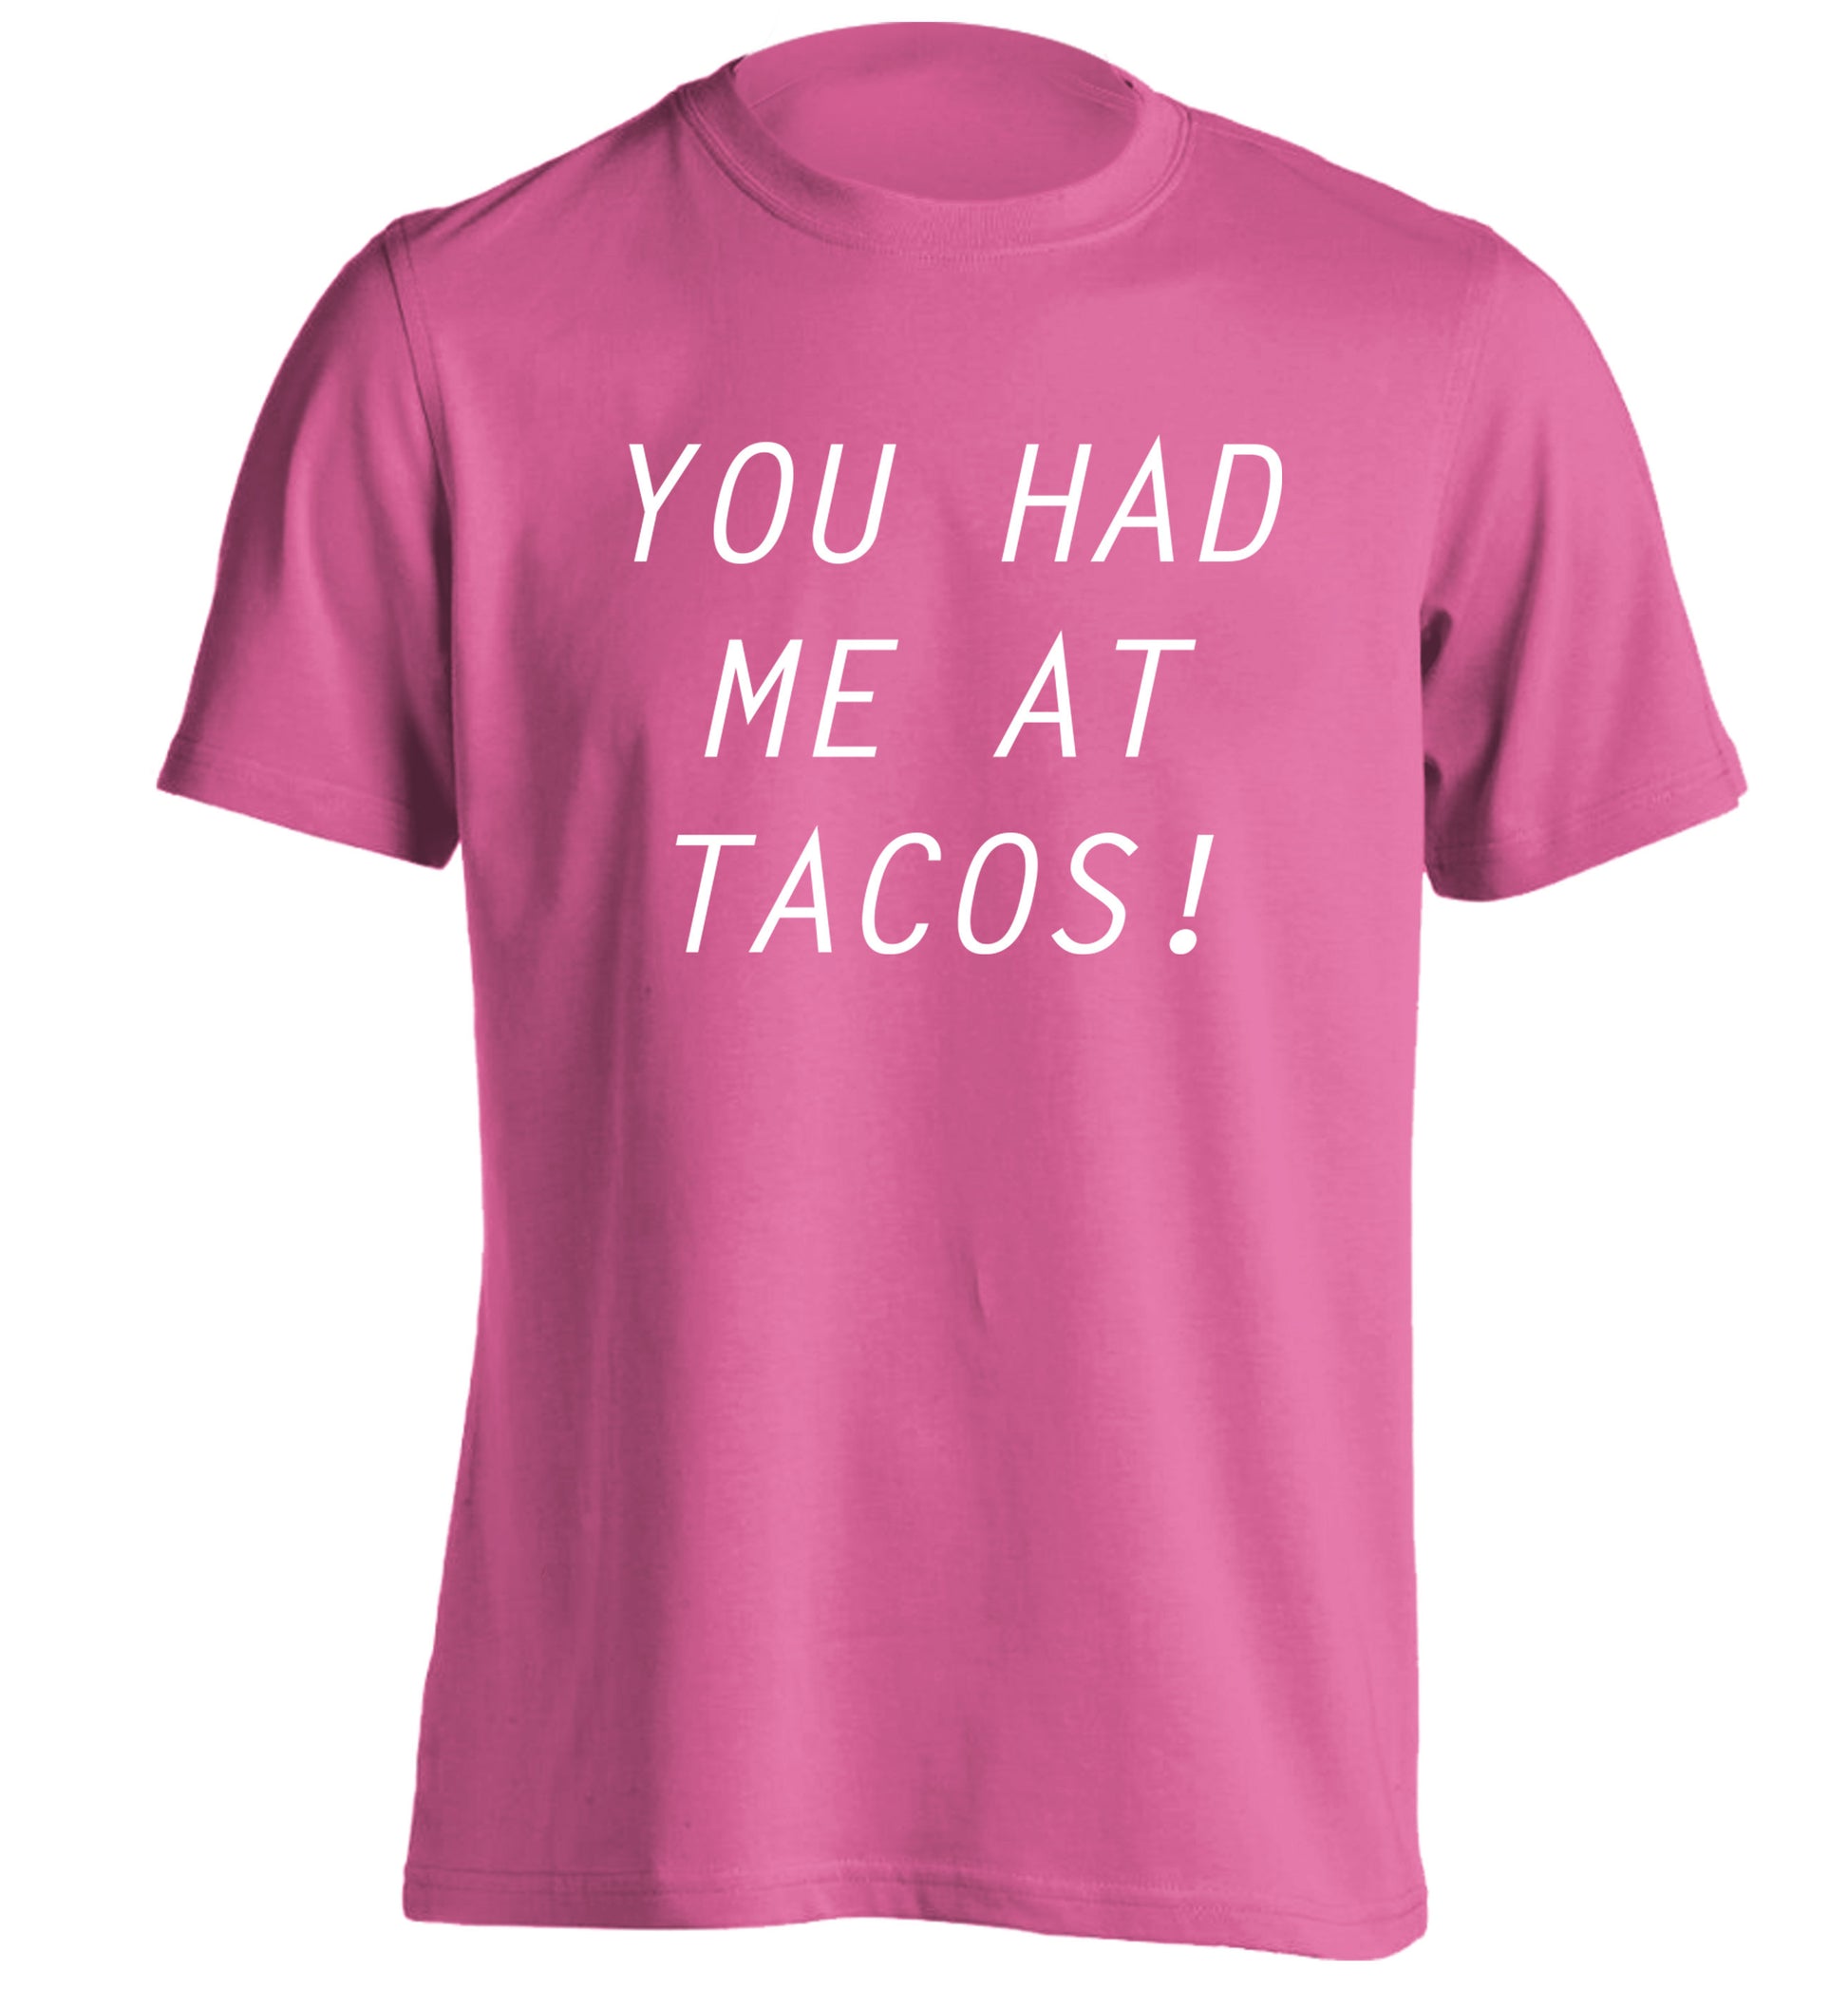 You had me at tacos adults unisex pink Tshirt 2XL